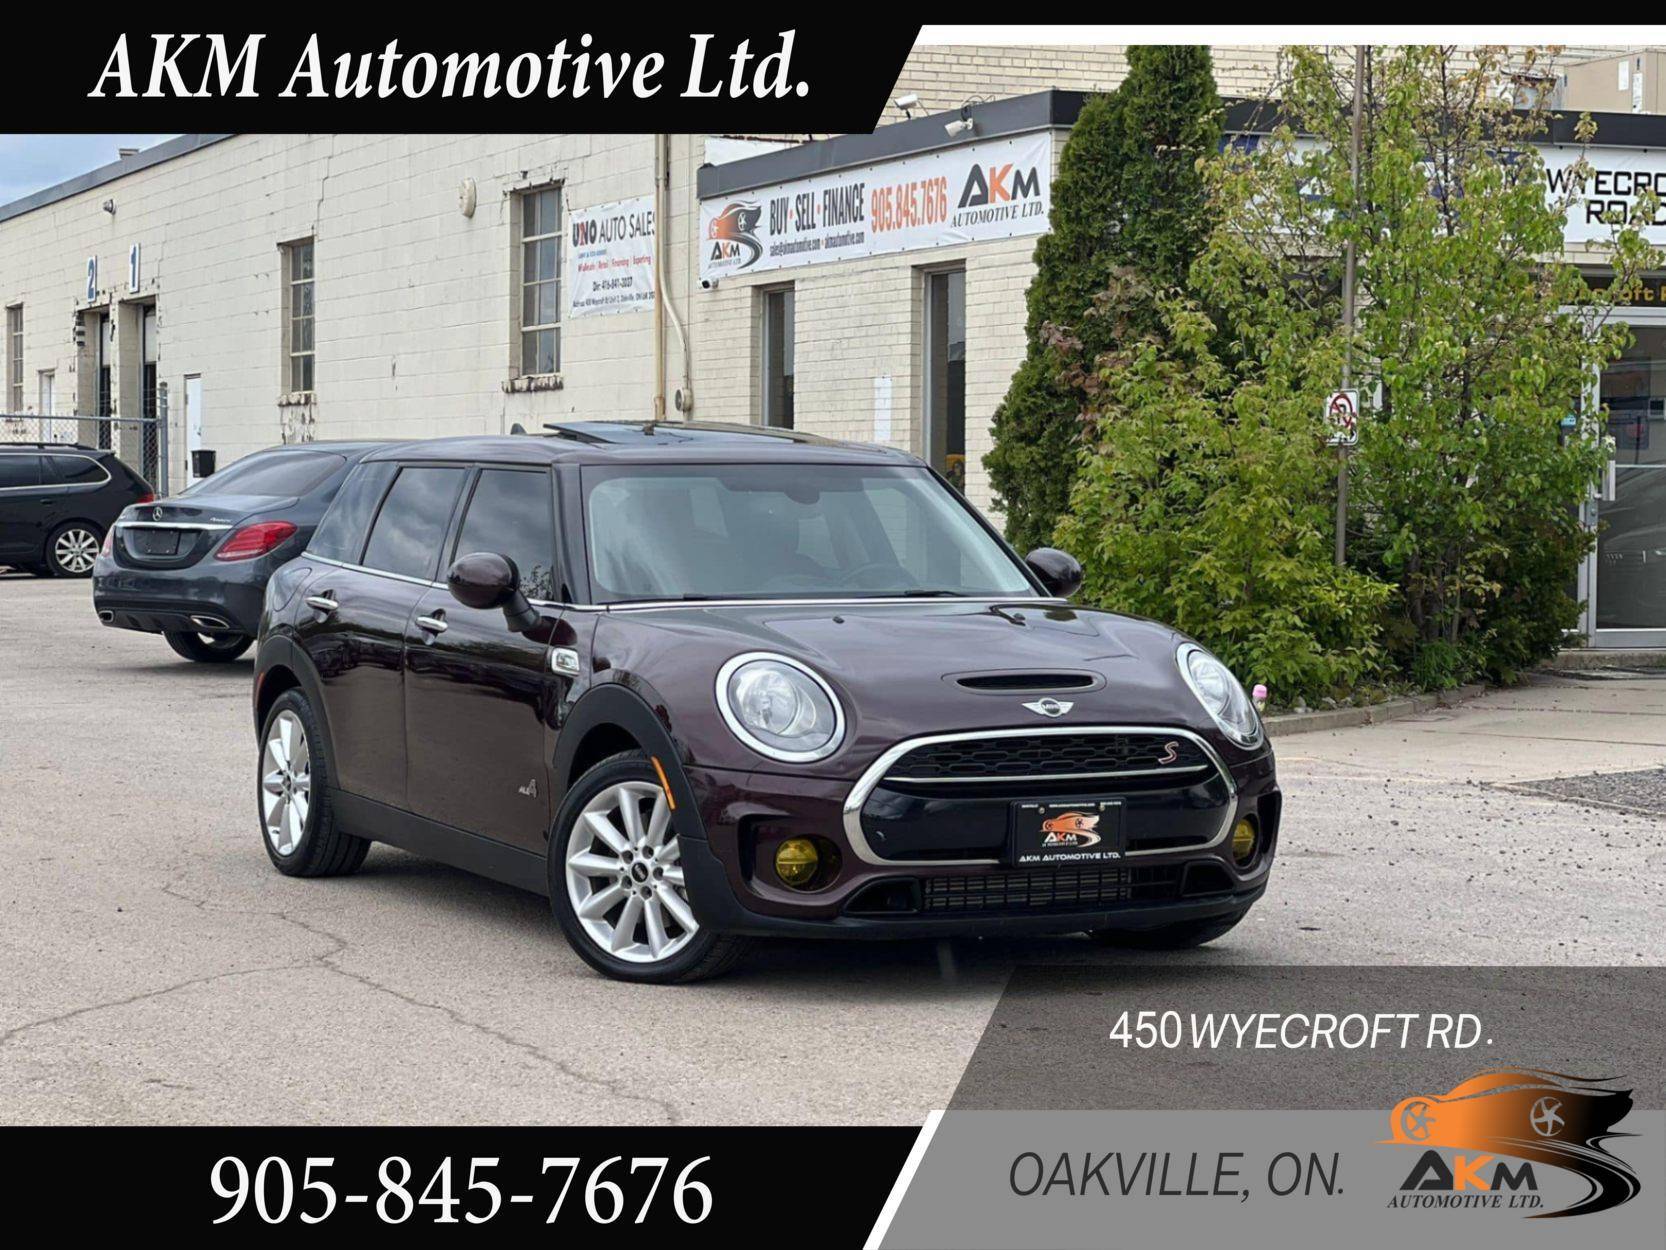 2017 MINI Cooper Clubman 4dr HB S ALL4, Certified